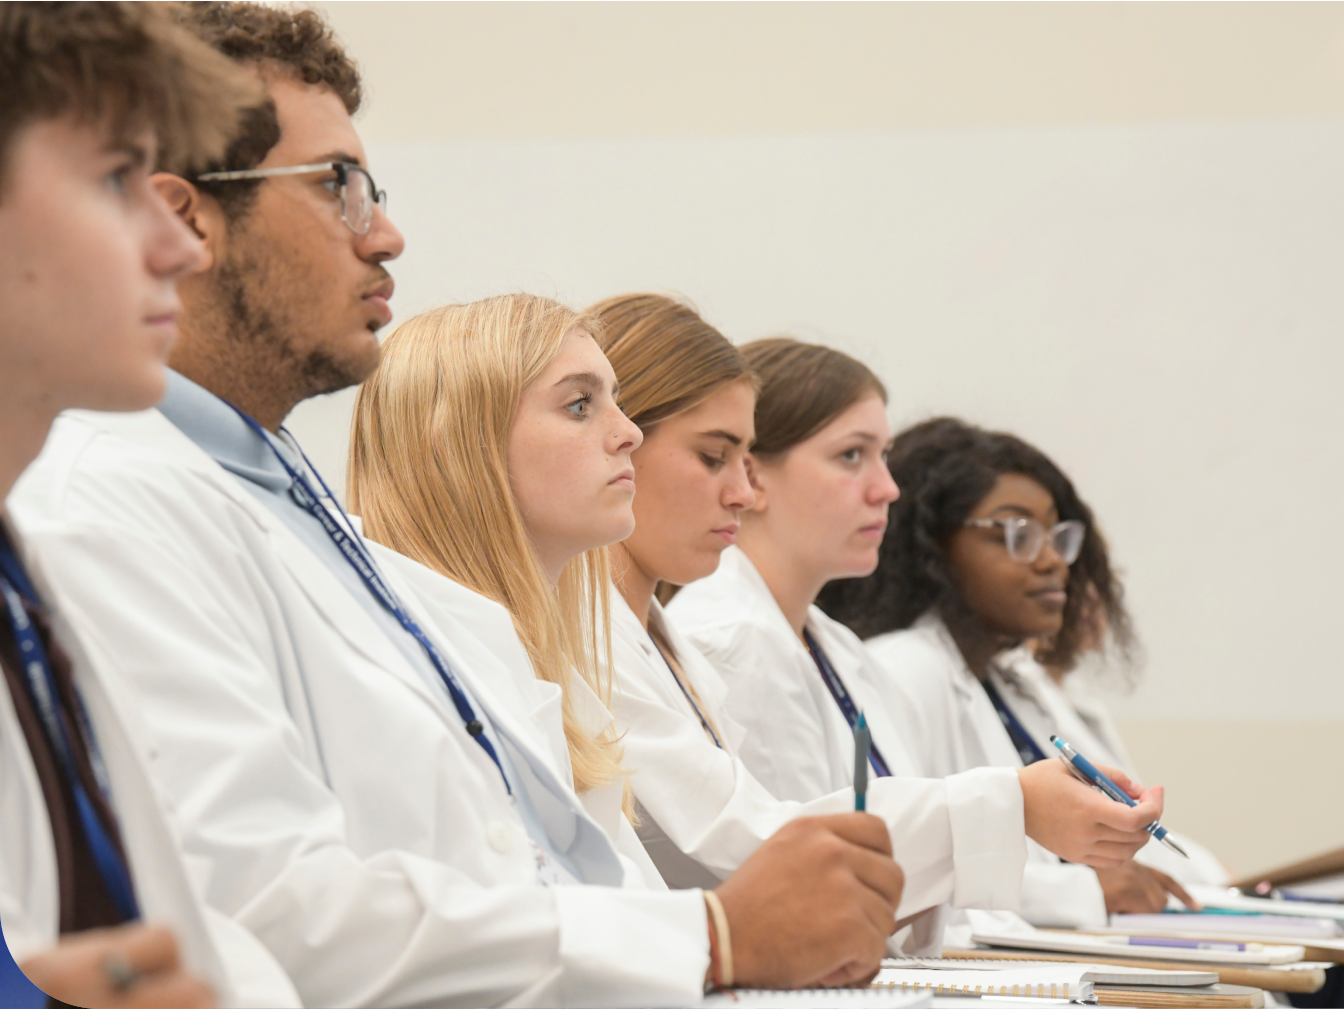 Medical students in a classroom